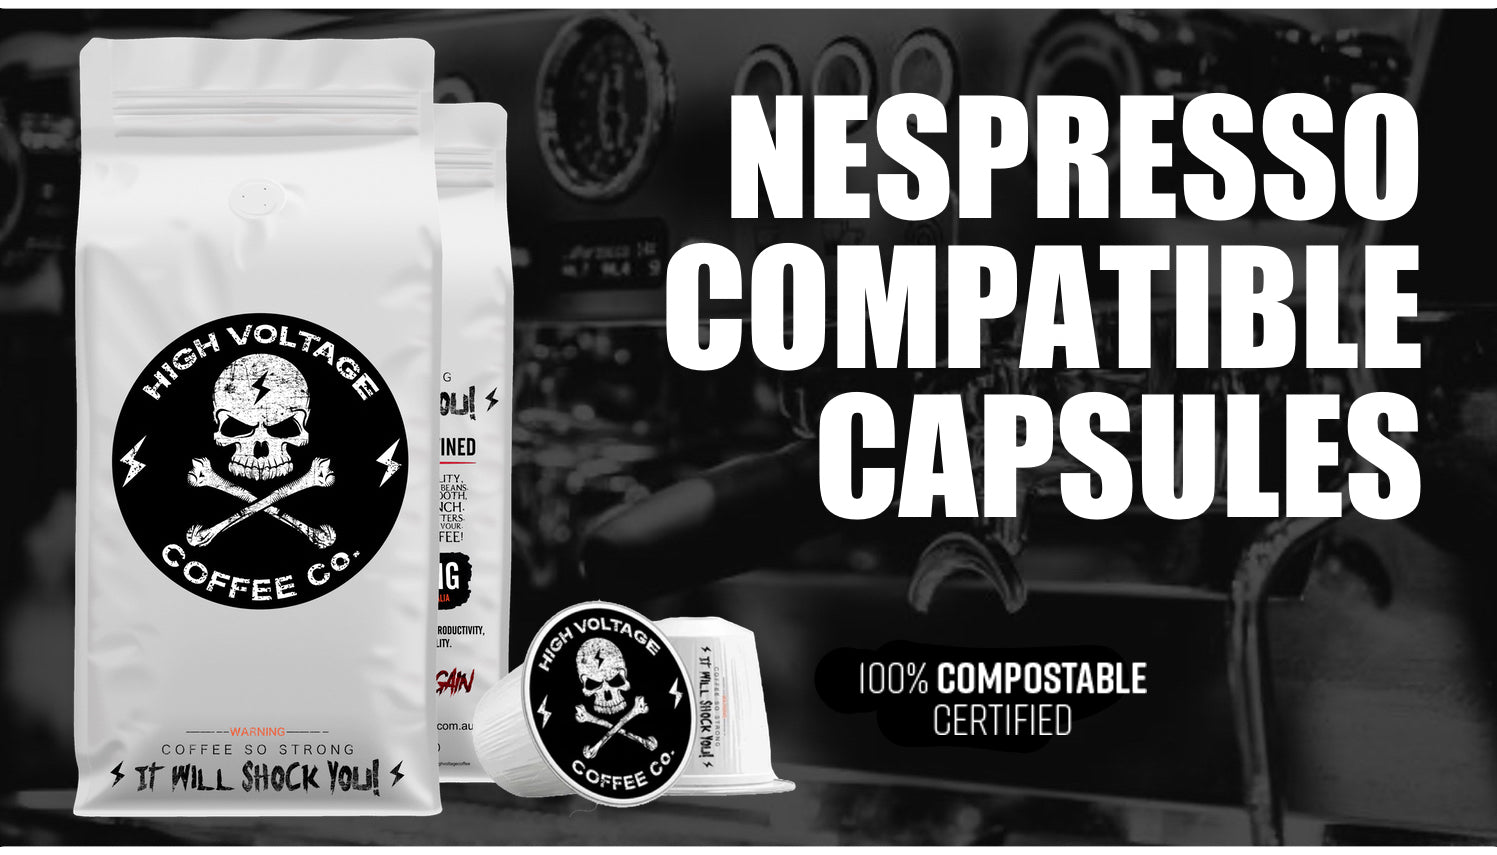 Black and white advertisement showing Australian Nespresso compatible coffee capsules with "High Voltage Coffee Co." branding, emphasizing their 100% compostable certification. strongest nespresso coffee capsules pods.